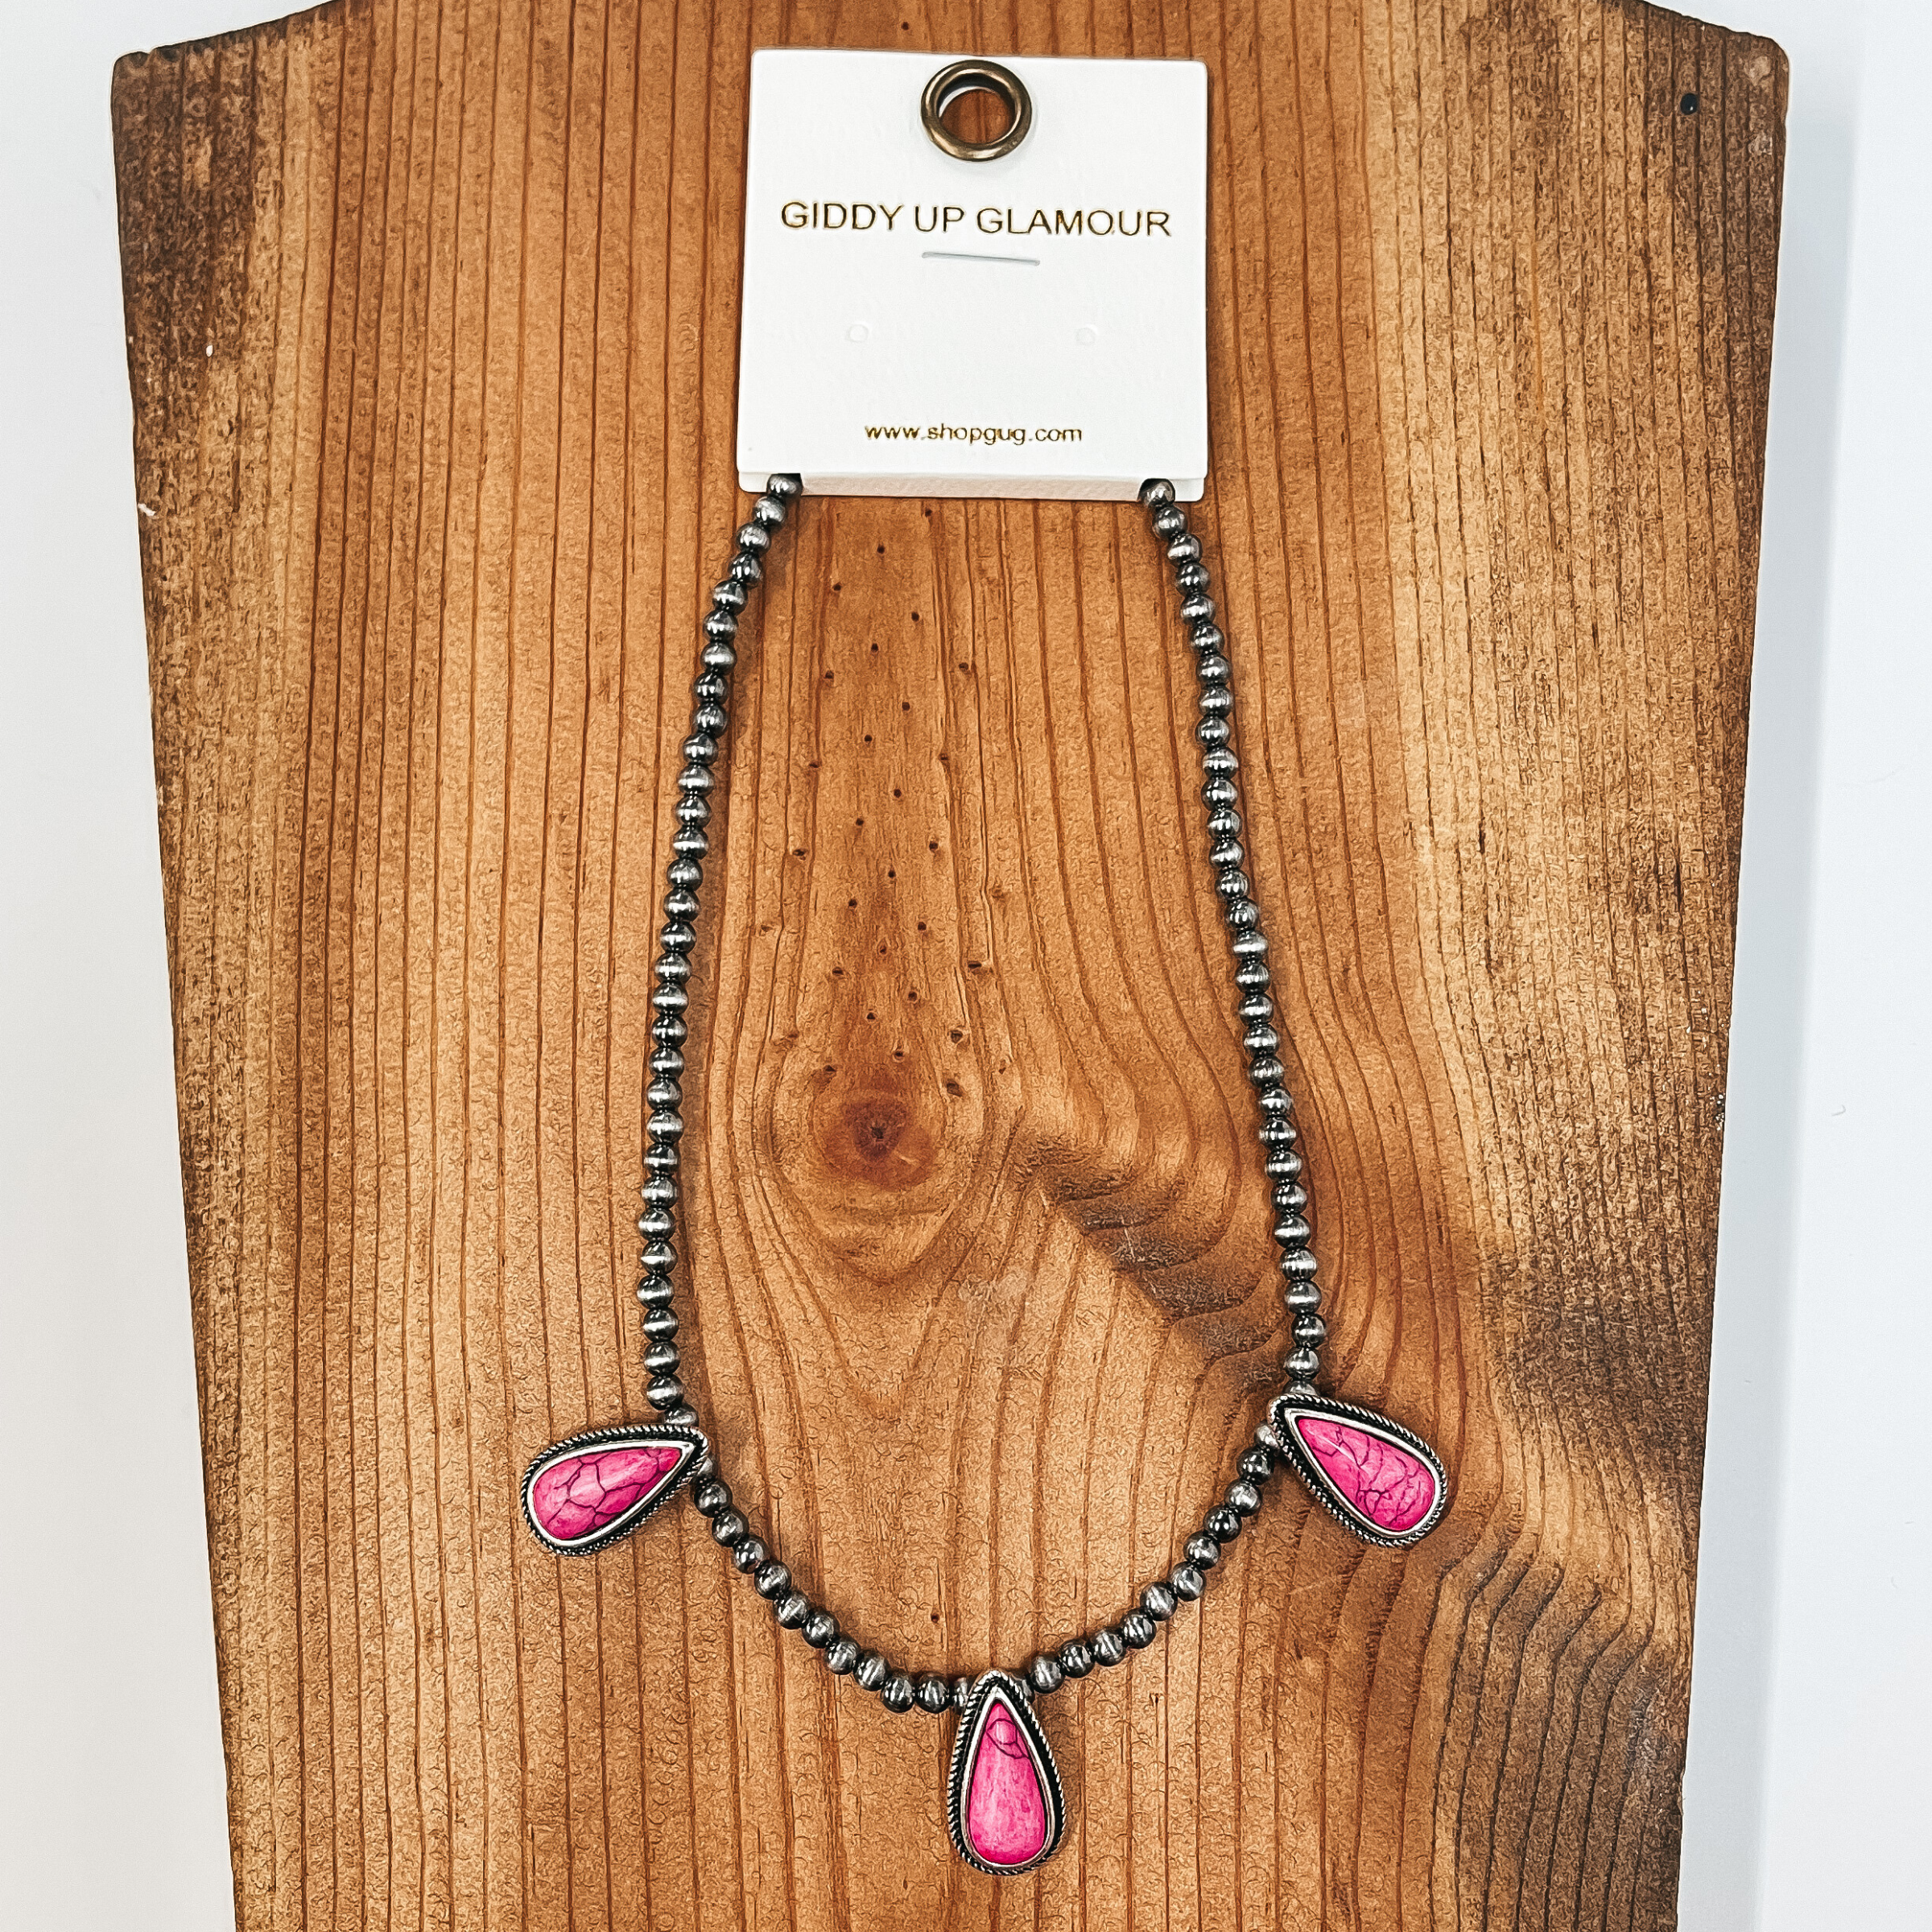 Faux navajo pearl choker with three teardrop shaped stones in pink with silver detailing around. Taken on a brown block and white background.